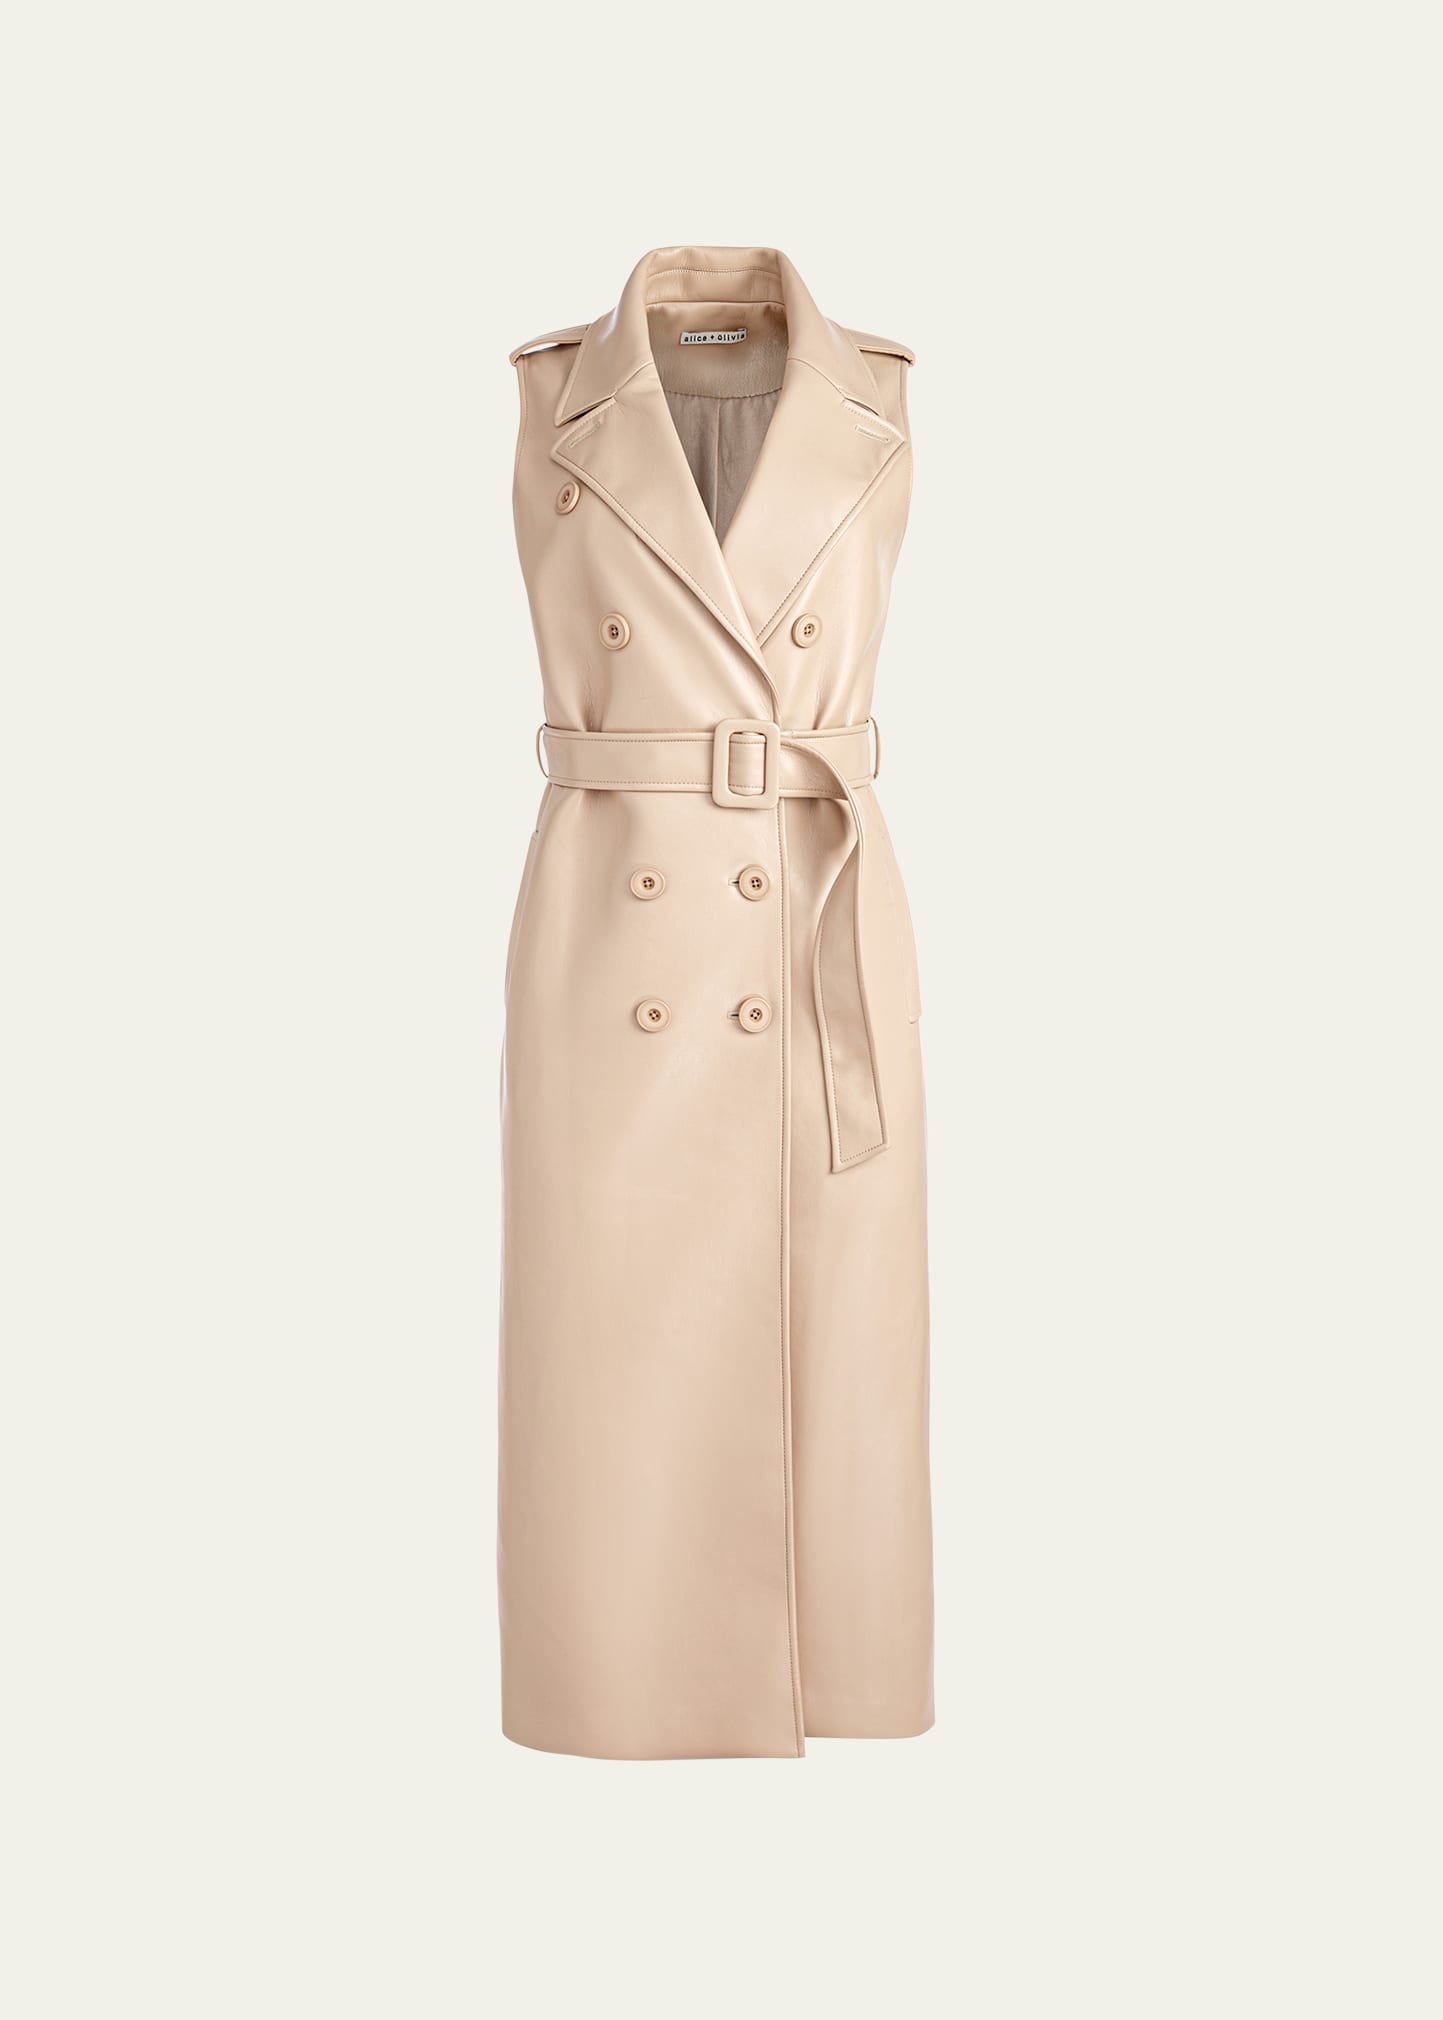 Alice And Olivia Conan Vegan Leather Belted Long Vest In Almond